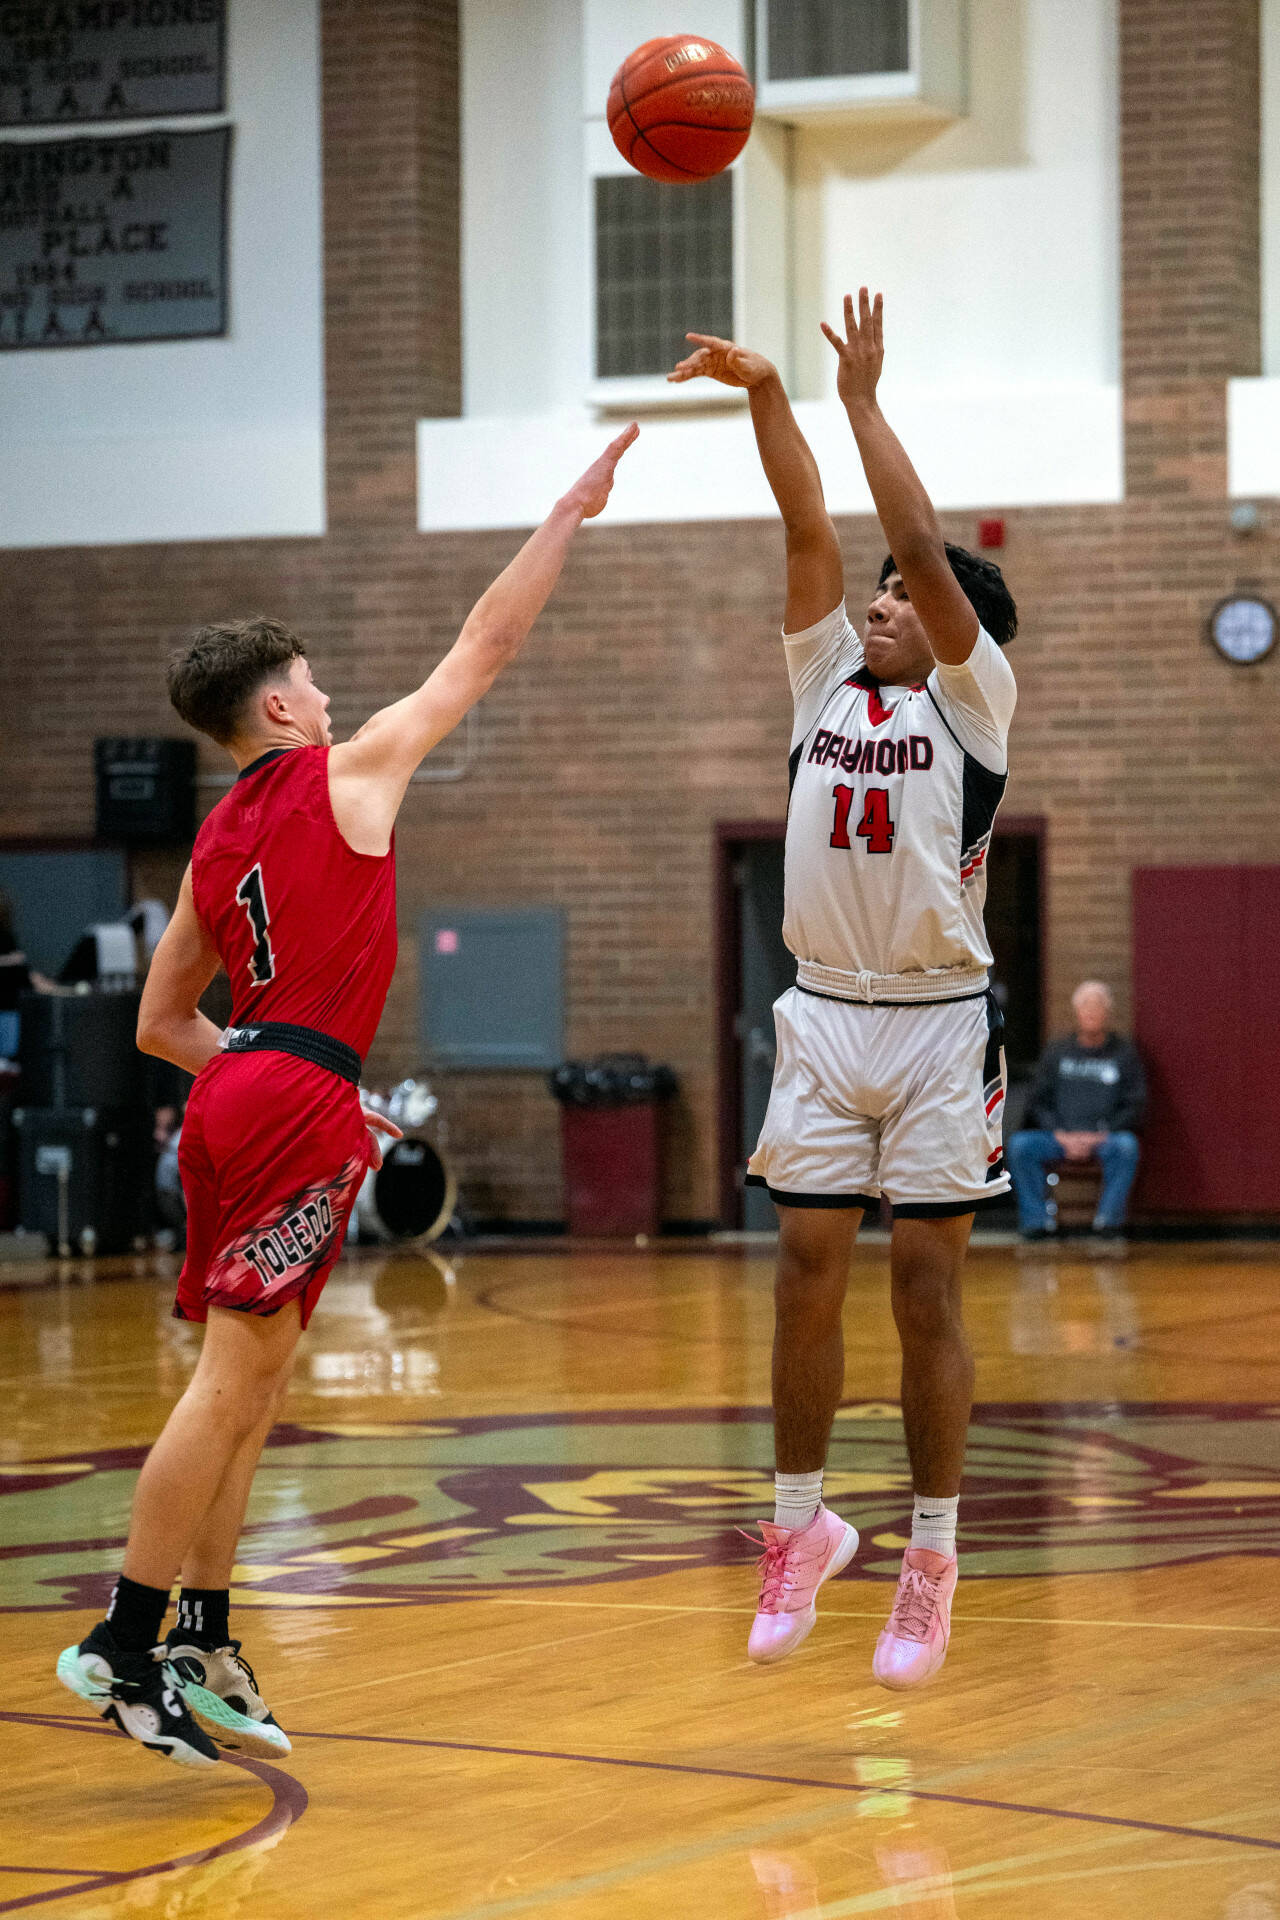 PHOTO BY FOREST WORGUM Raymond junior guard Chris Quintana (14), seen here in a file photo, was named to the 2B Pacific All-League Boys Basketball First Team after leading the Seagulls in scoring this season.